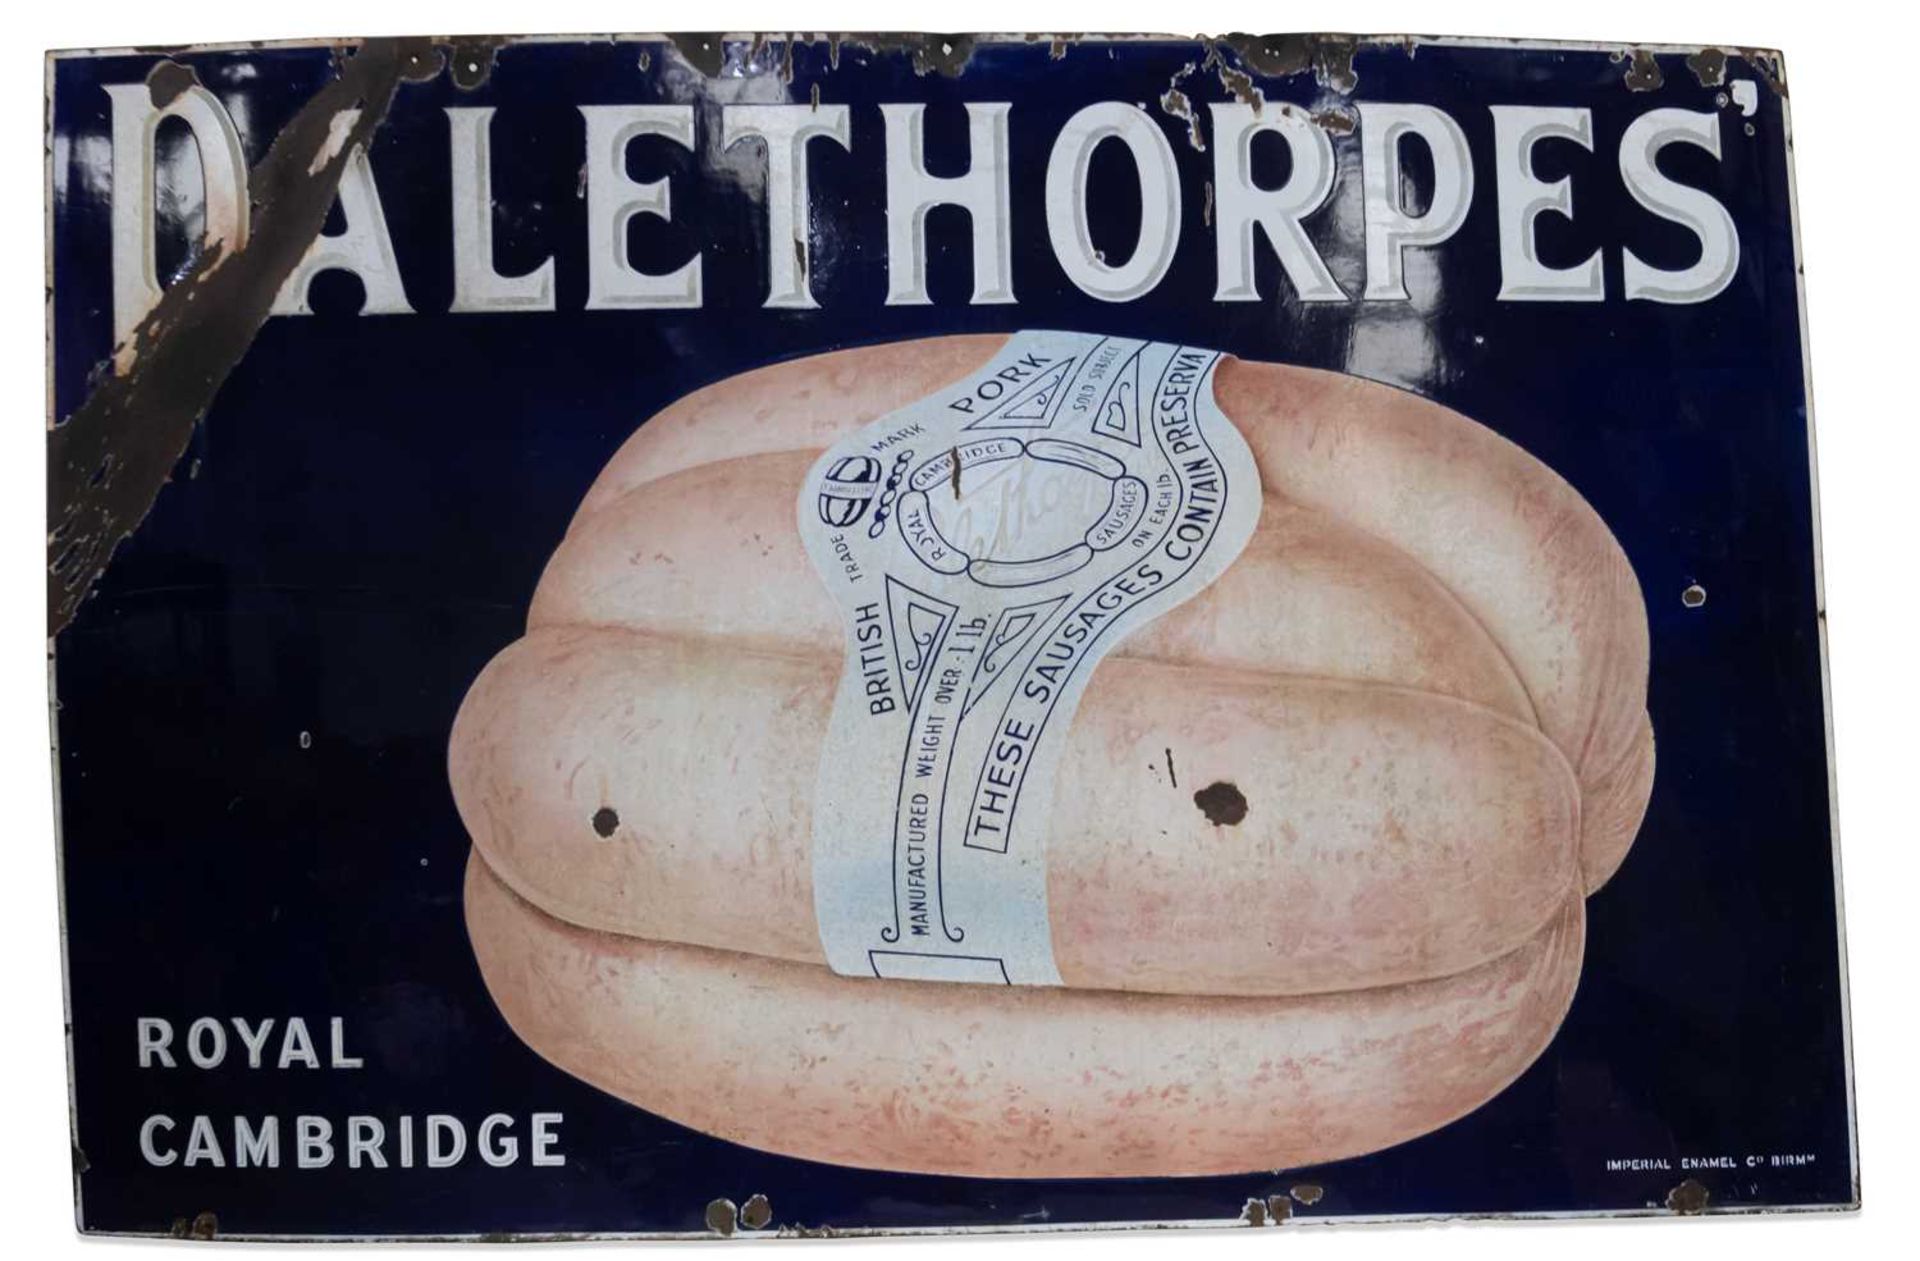 A LARGE ENAMEL SIGN, PALETHORPES' ROYAL CAMBRIDGE SAUSAGES, BY IMPERIAL ENAMEL COMPANY